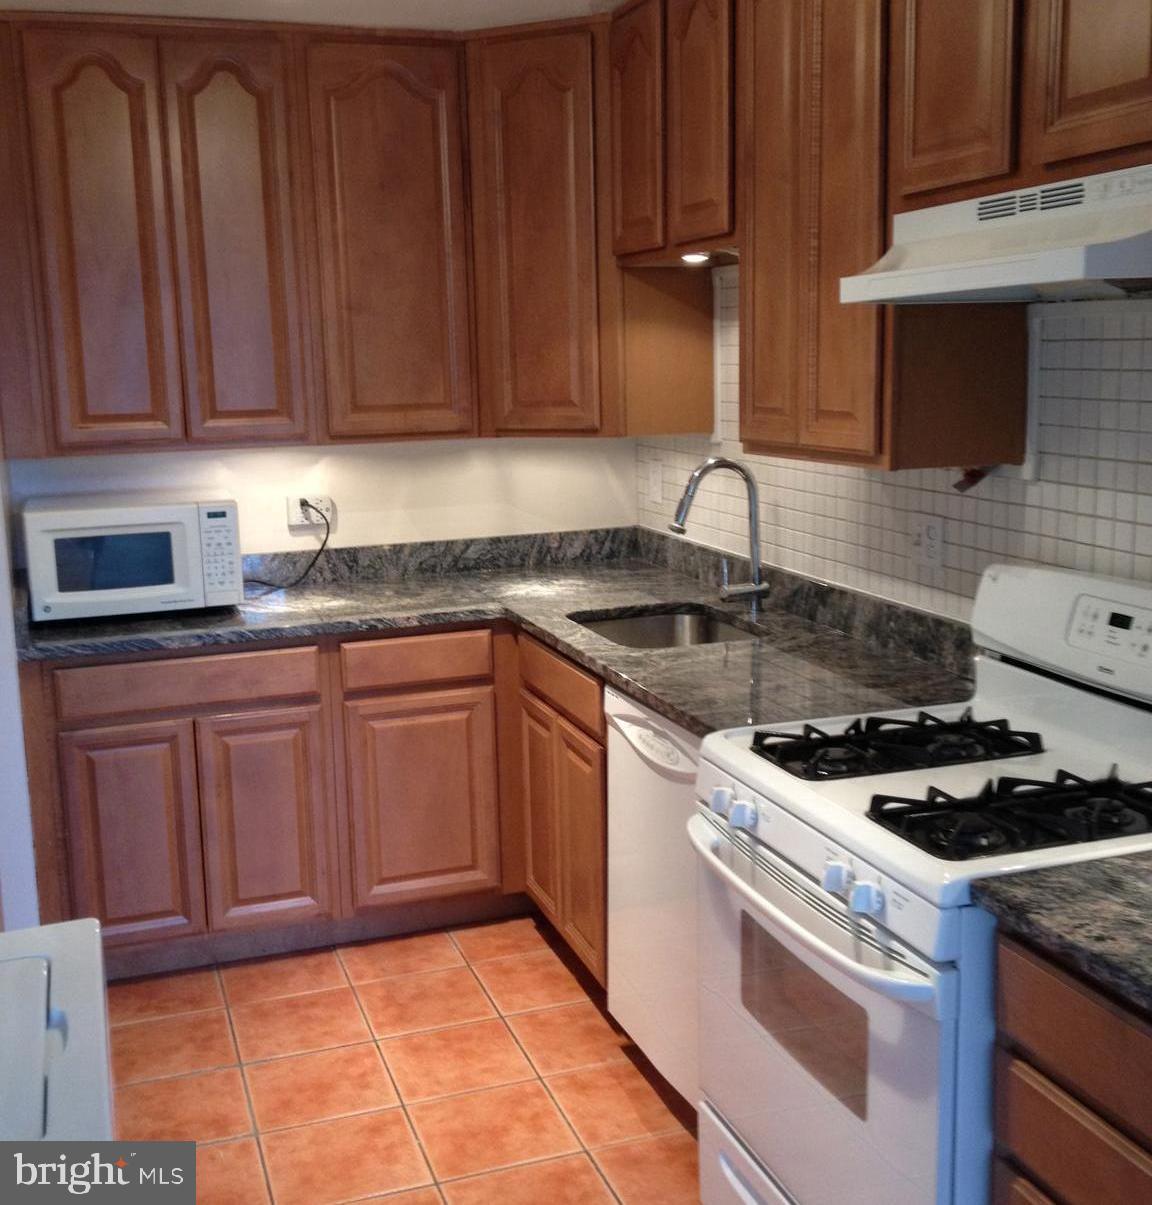 a kitchen with granite countertop stainless steel appliances a stove a microwave oven and a sink with cabinets